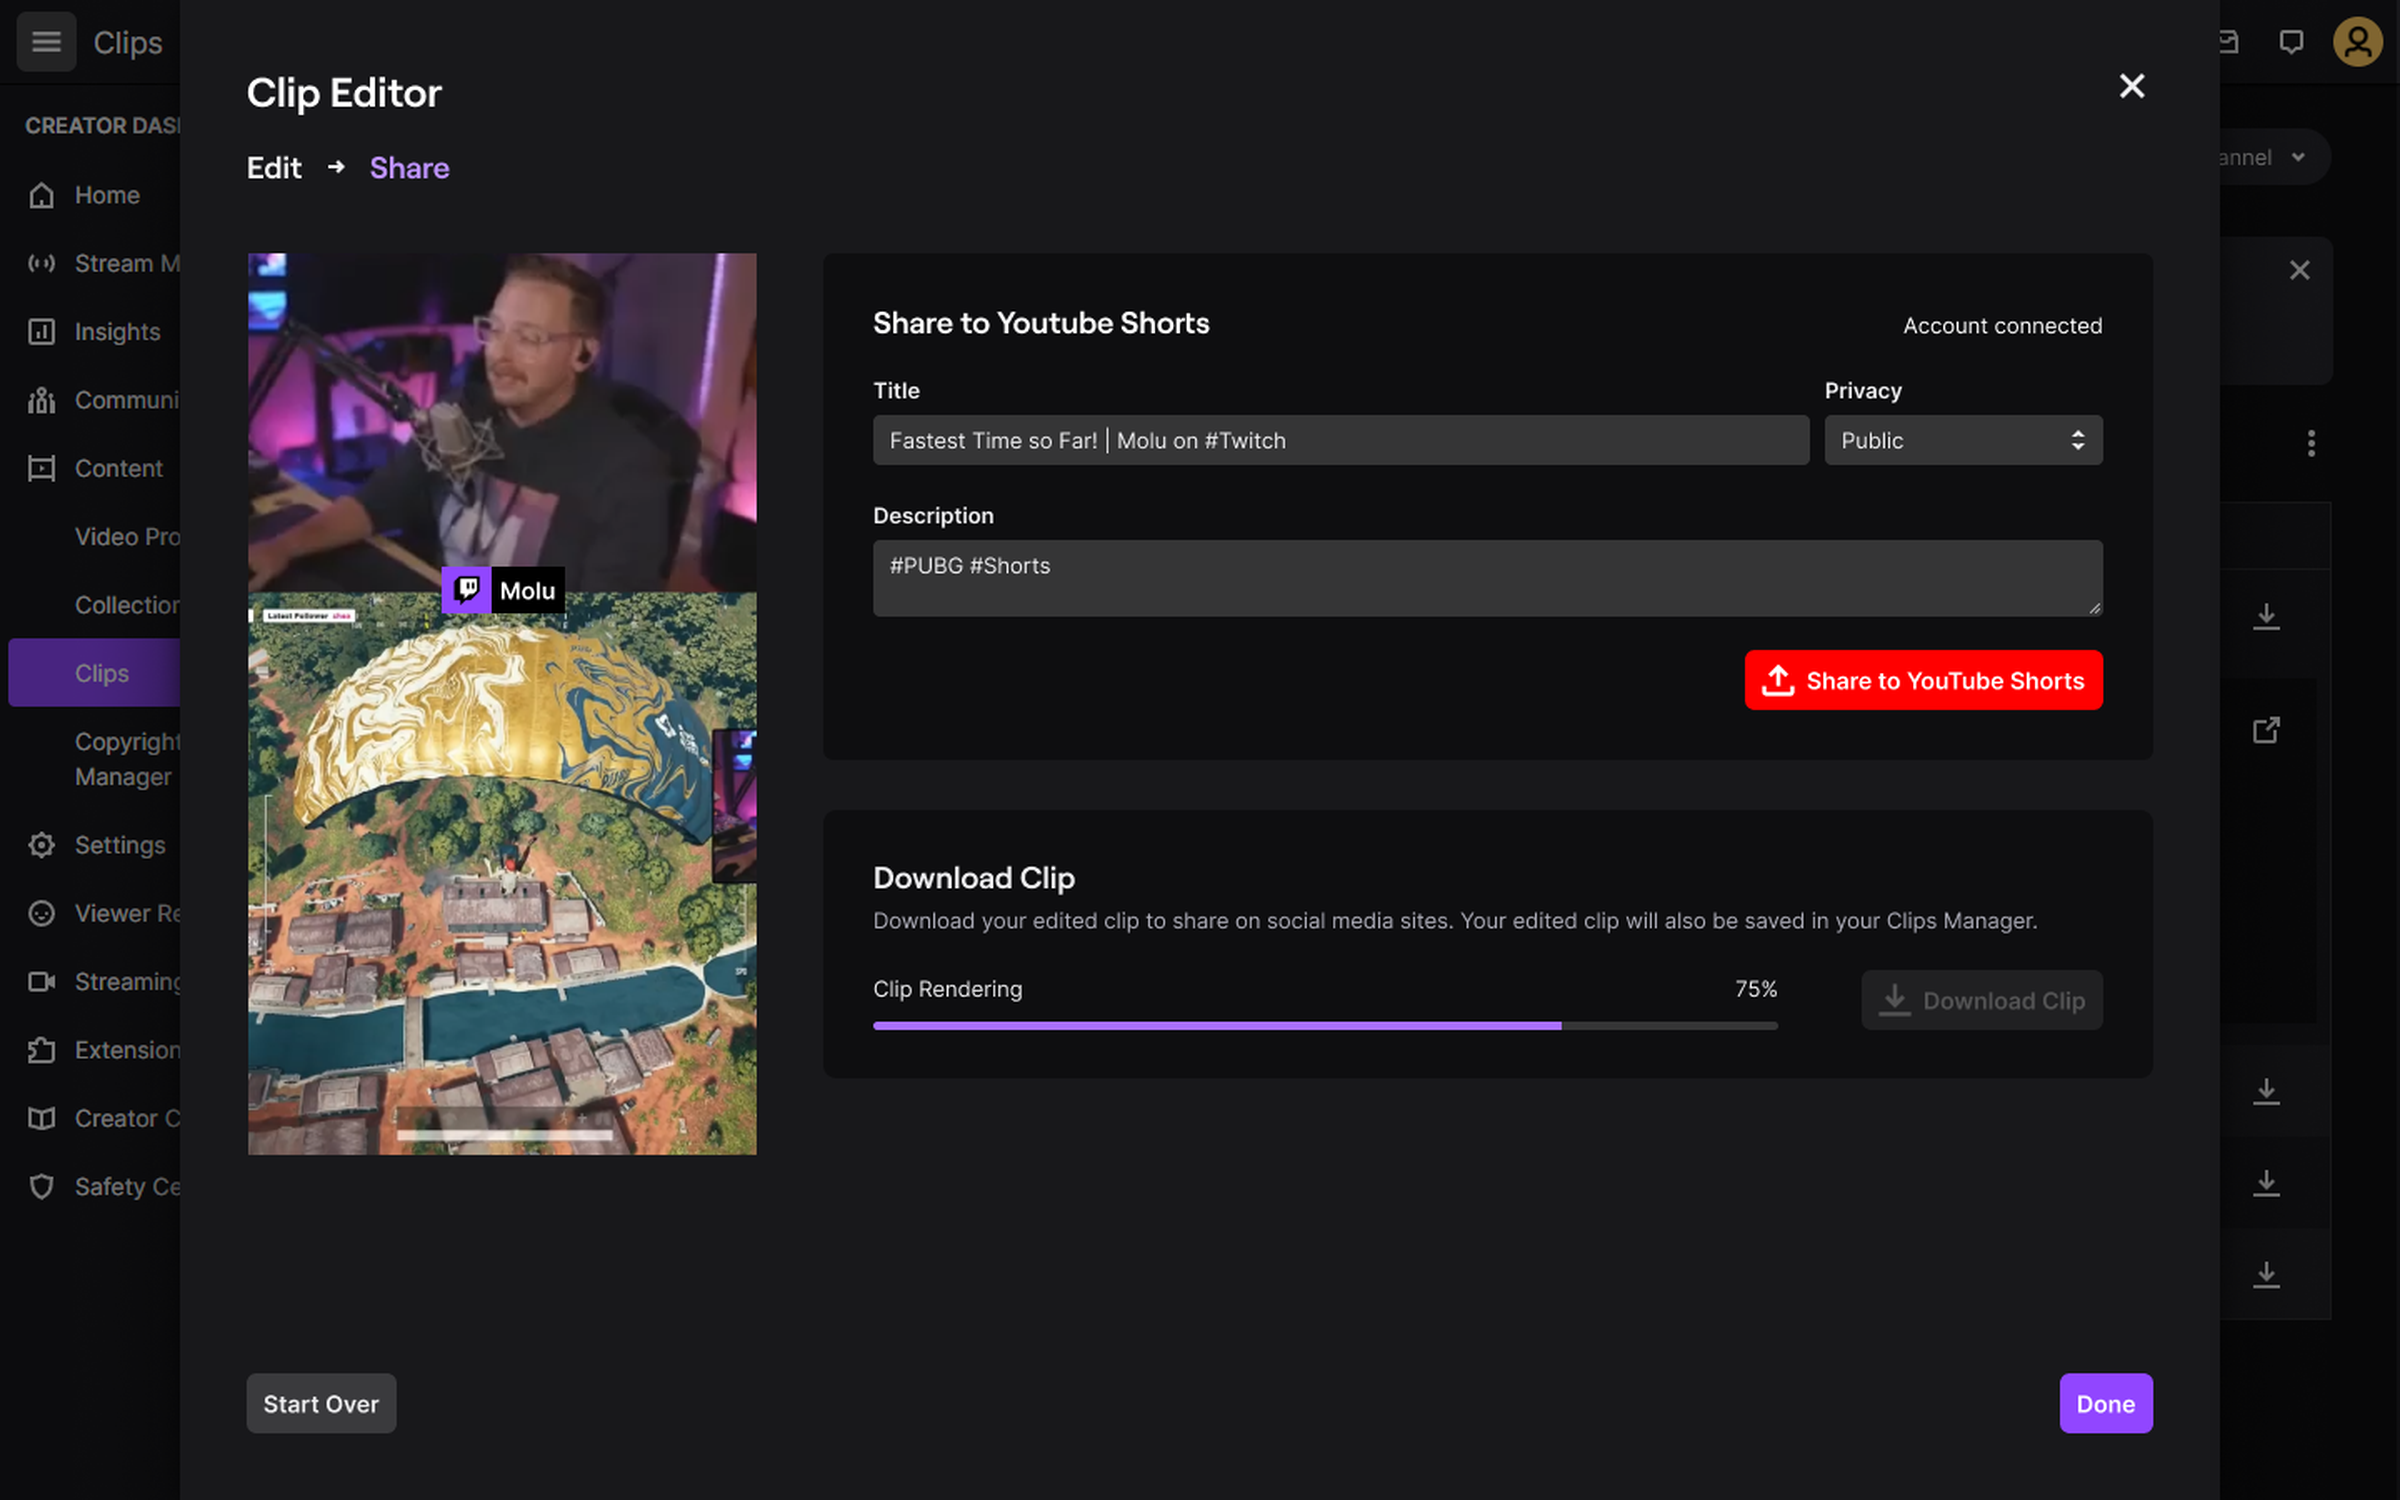 A screenshot of someone uploading a video from the Twitch Clip Editor to YouTube Shorts.